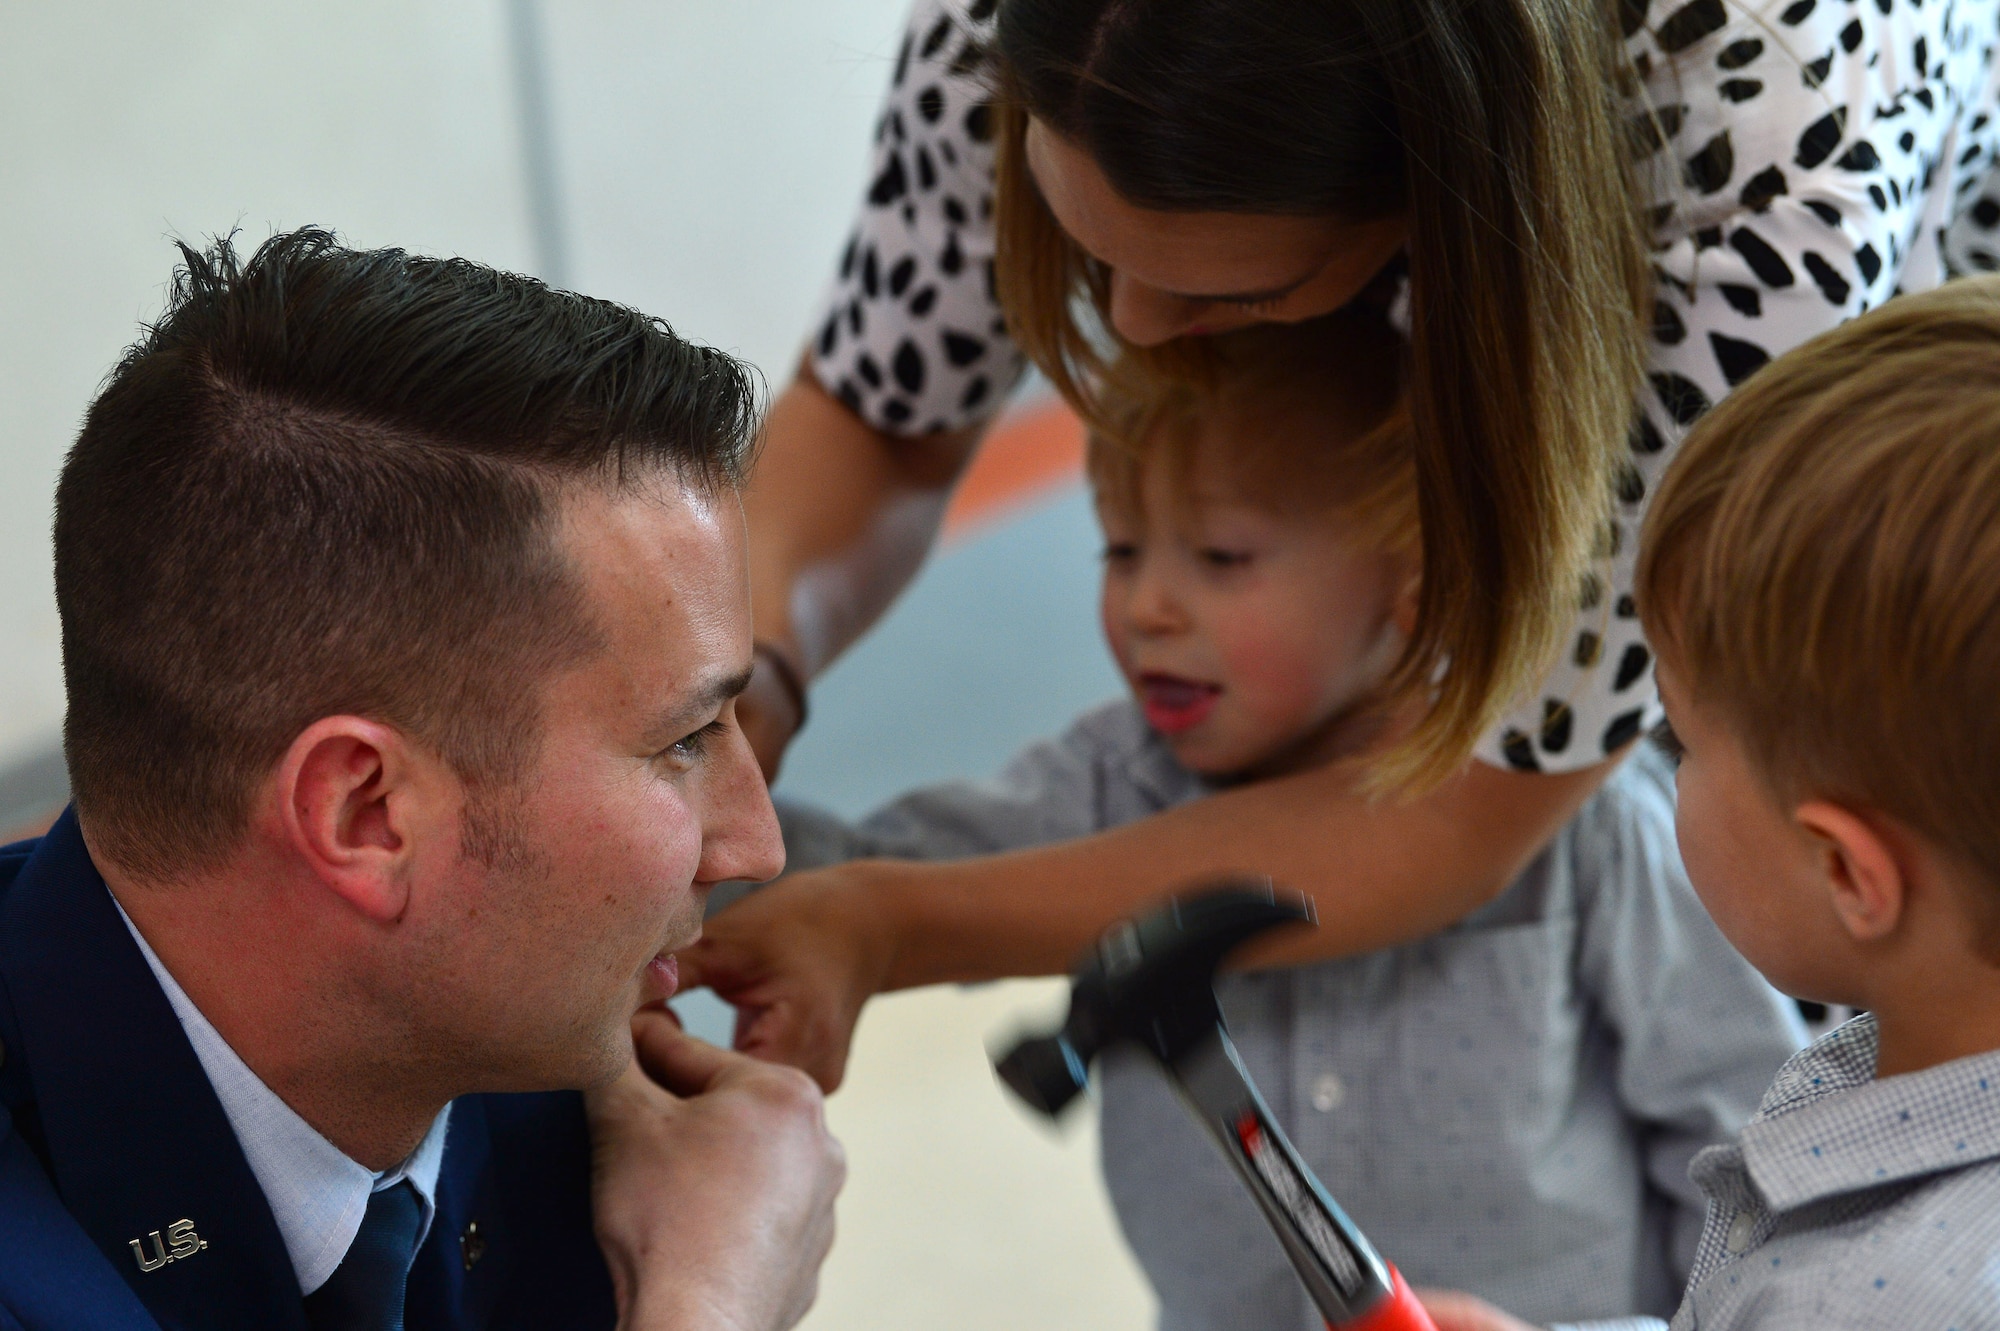 Maj. Phillip, 732nd Operations Group chief of intelligence, gets his rank pinned on by his wife and children during his promotion ceremony March 31, 2018, in Las Vegas. Phillip was surrounded by family and friends who came to celebrate his promotion to major. (U.S. Air Force photo by Airman 1st Class Haley Stevens)